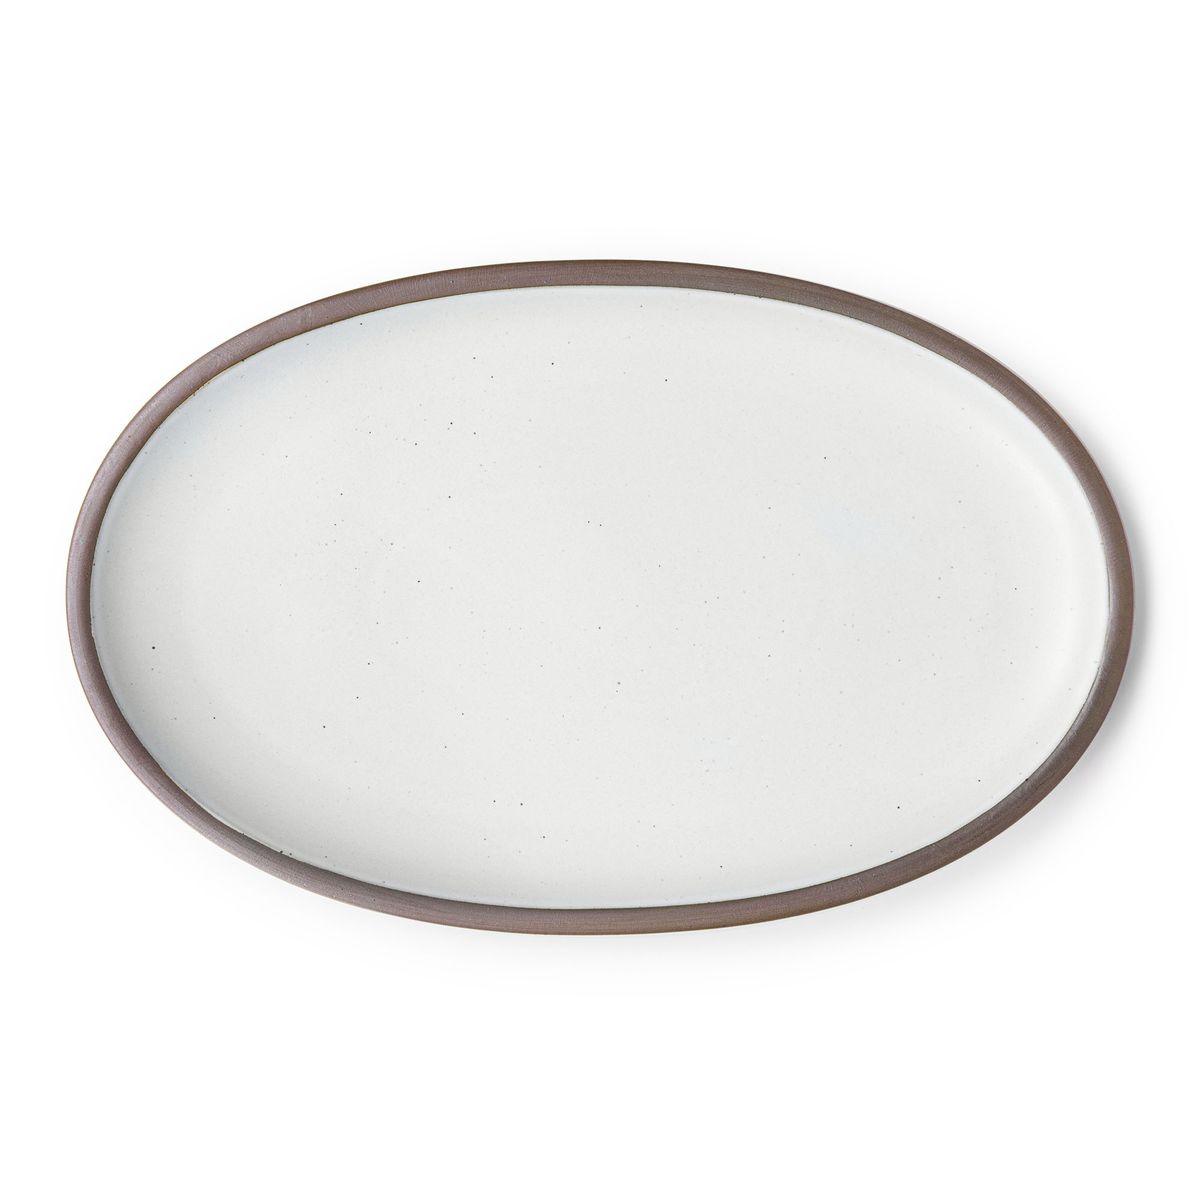 A large oval ceramic platter in a cool white color featuring iron speckles and an unglazed rim